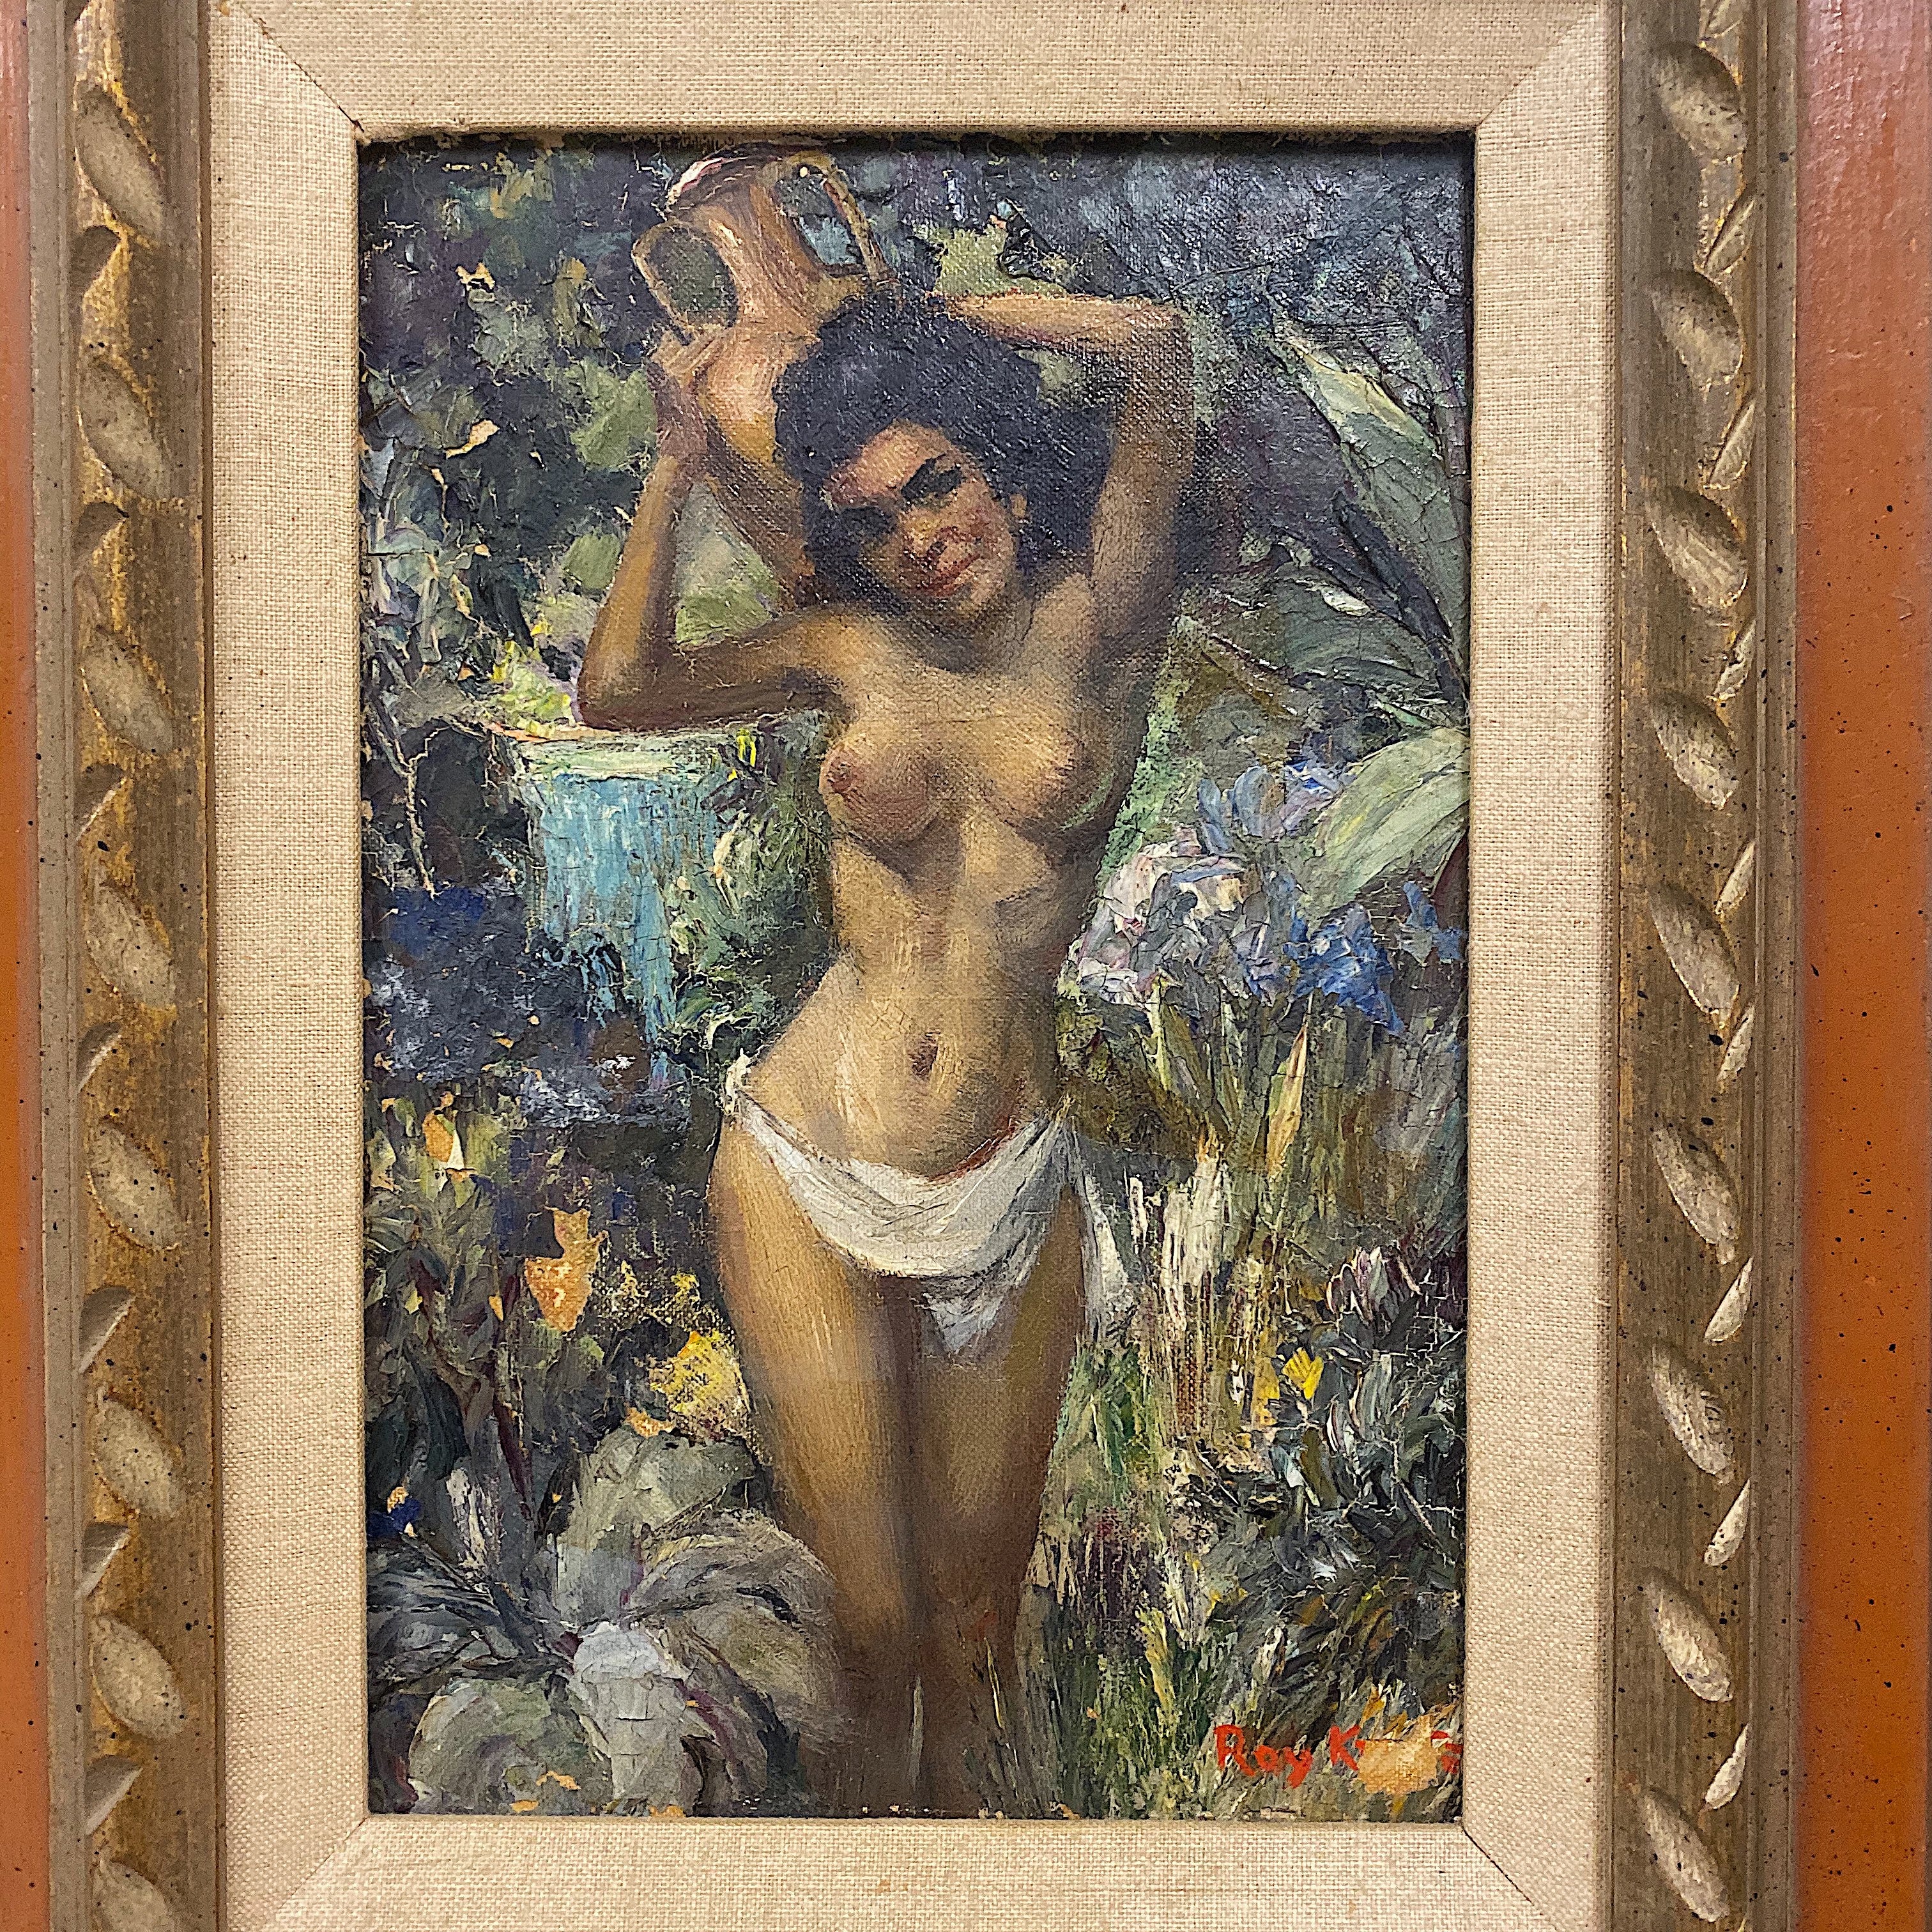 Roy Keister Nude Painting titled "Nina" - 1950s? - Signed by Listed Artist - Vintage Knife Paintings - Illustration Artist - AS IS Illustration